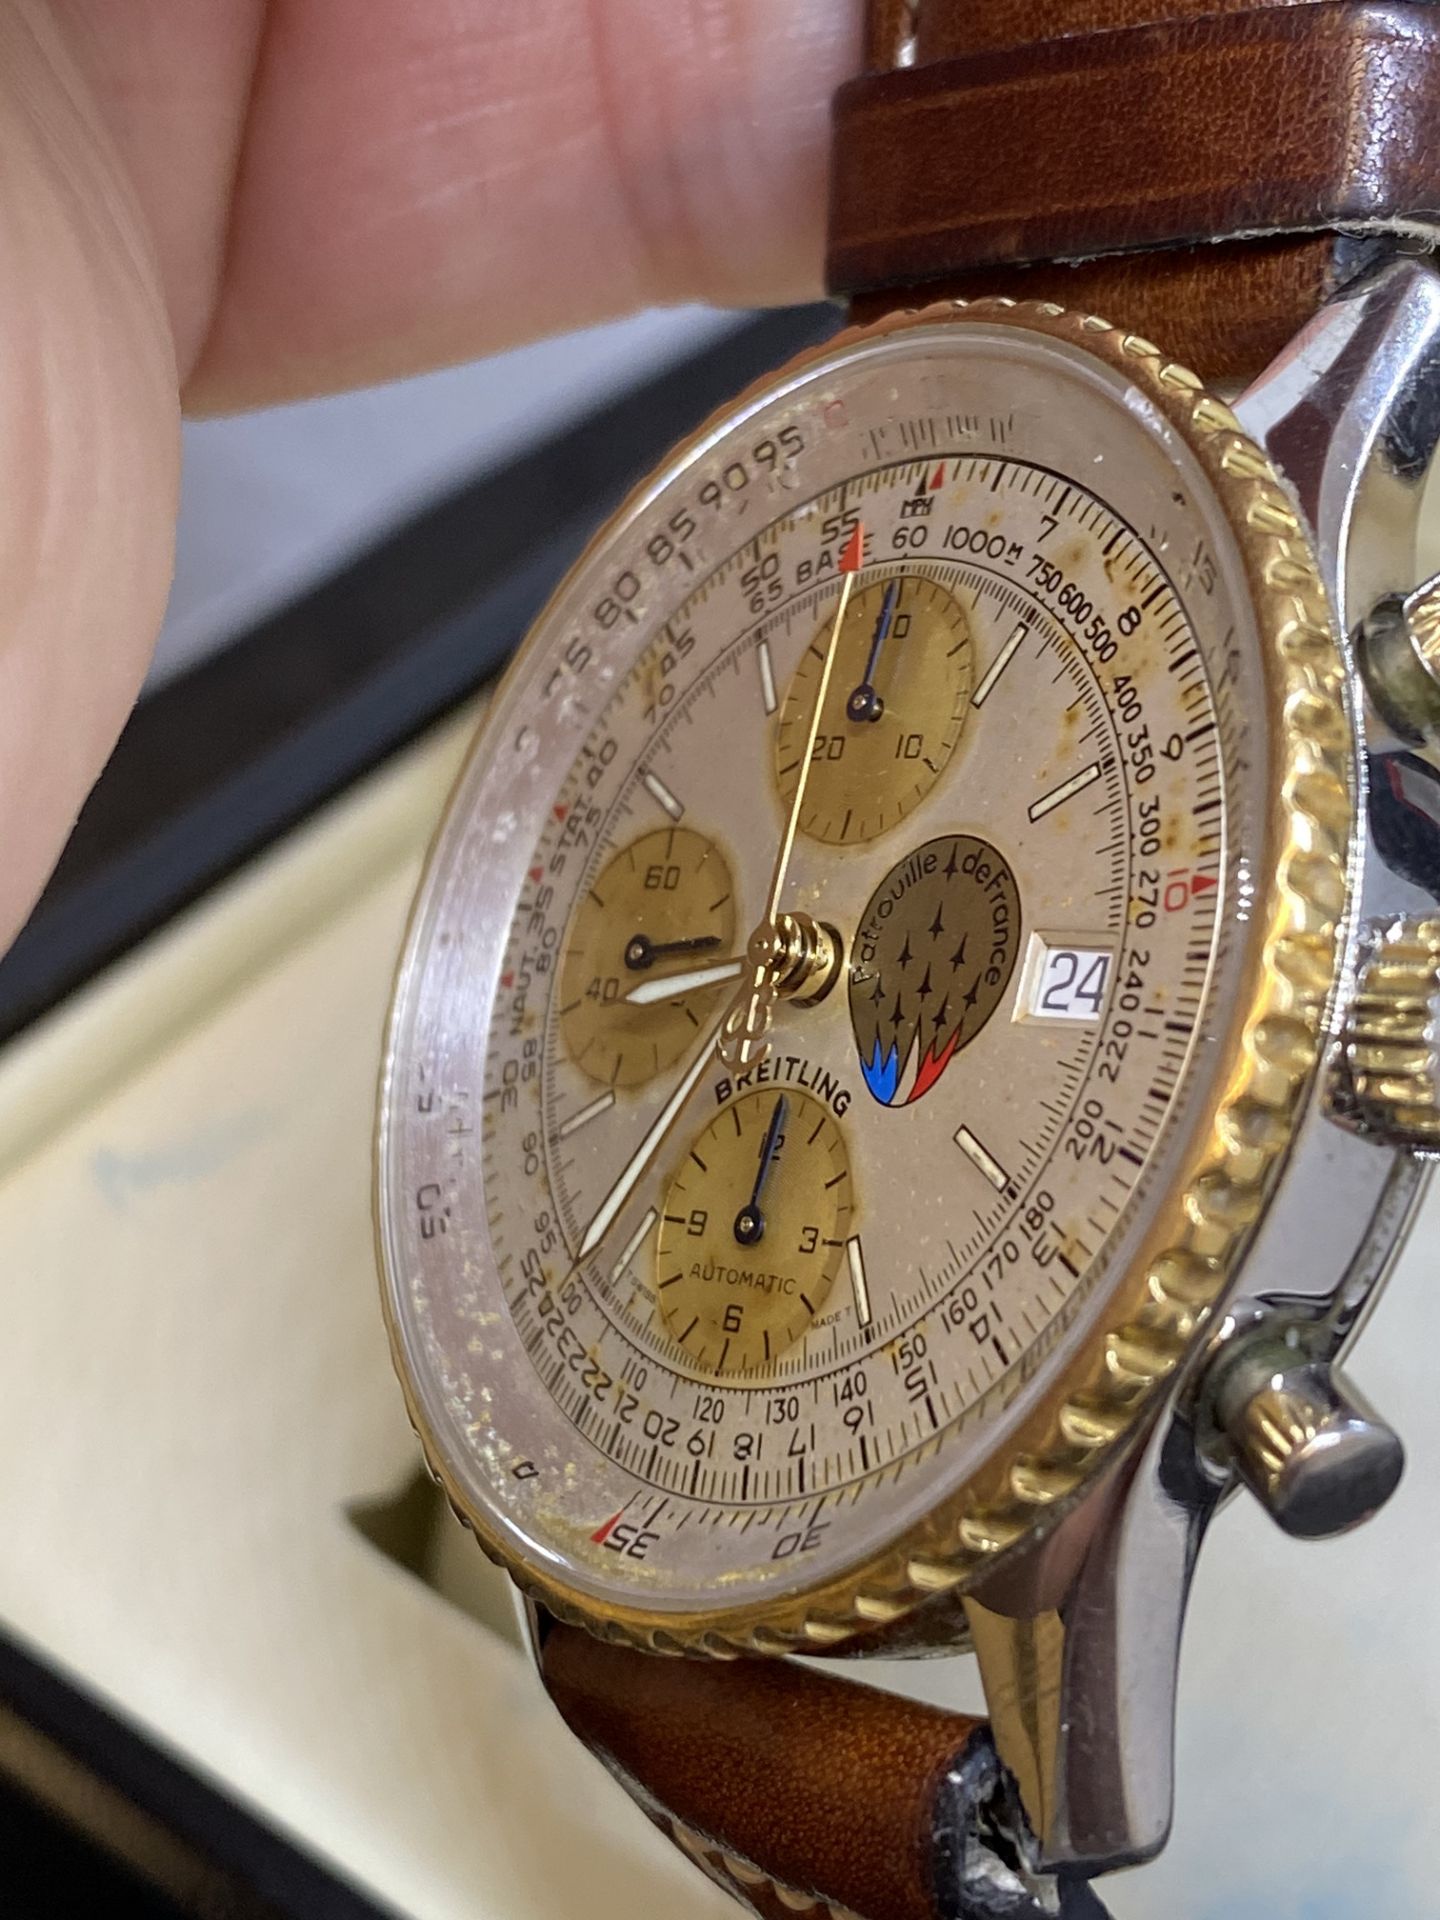 Breitling Navitimer Chronograph Watch with Box - Image 14 of 14